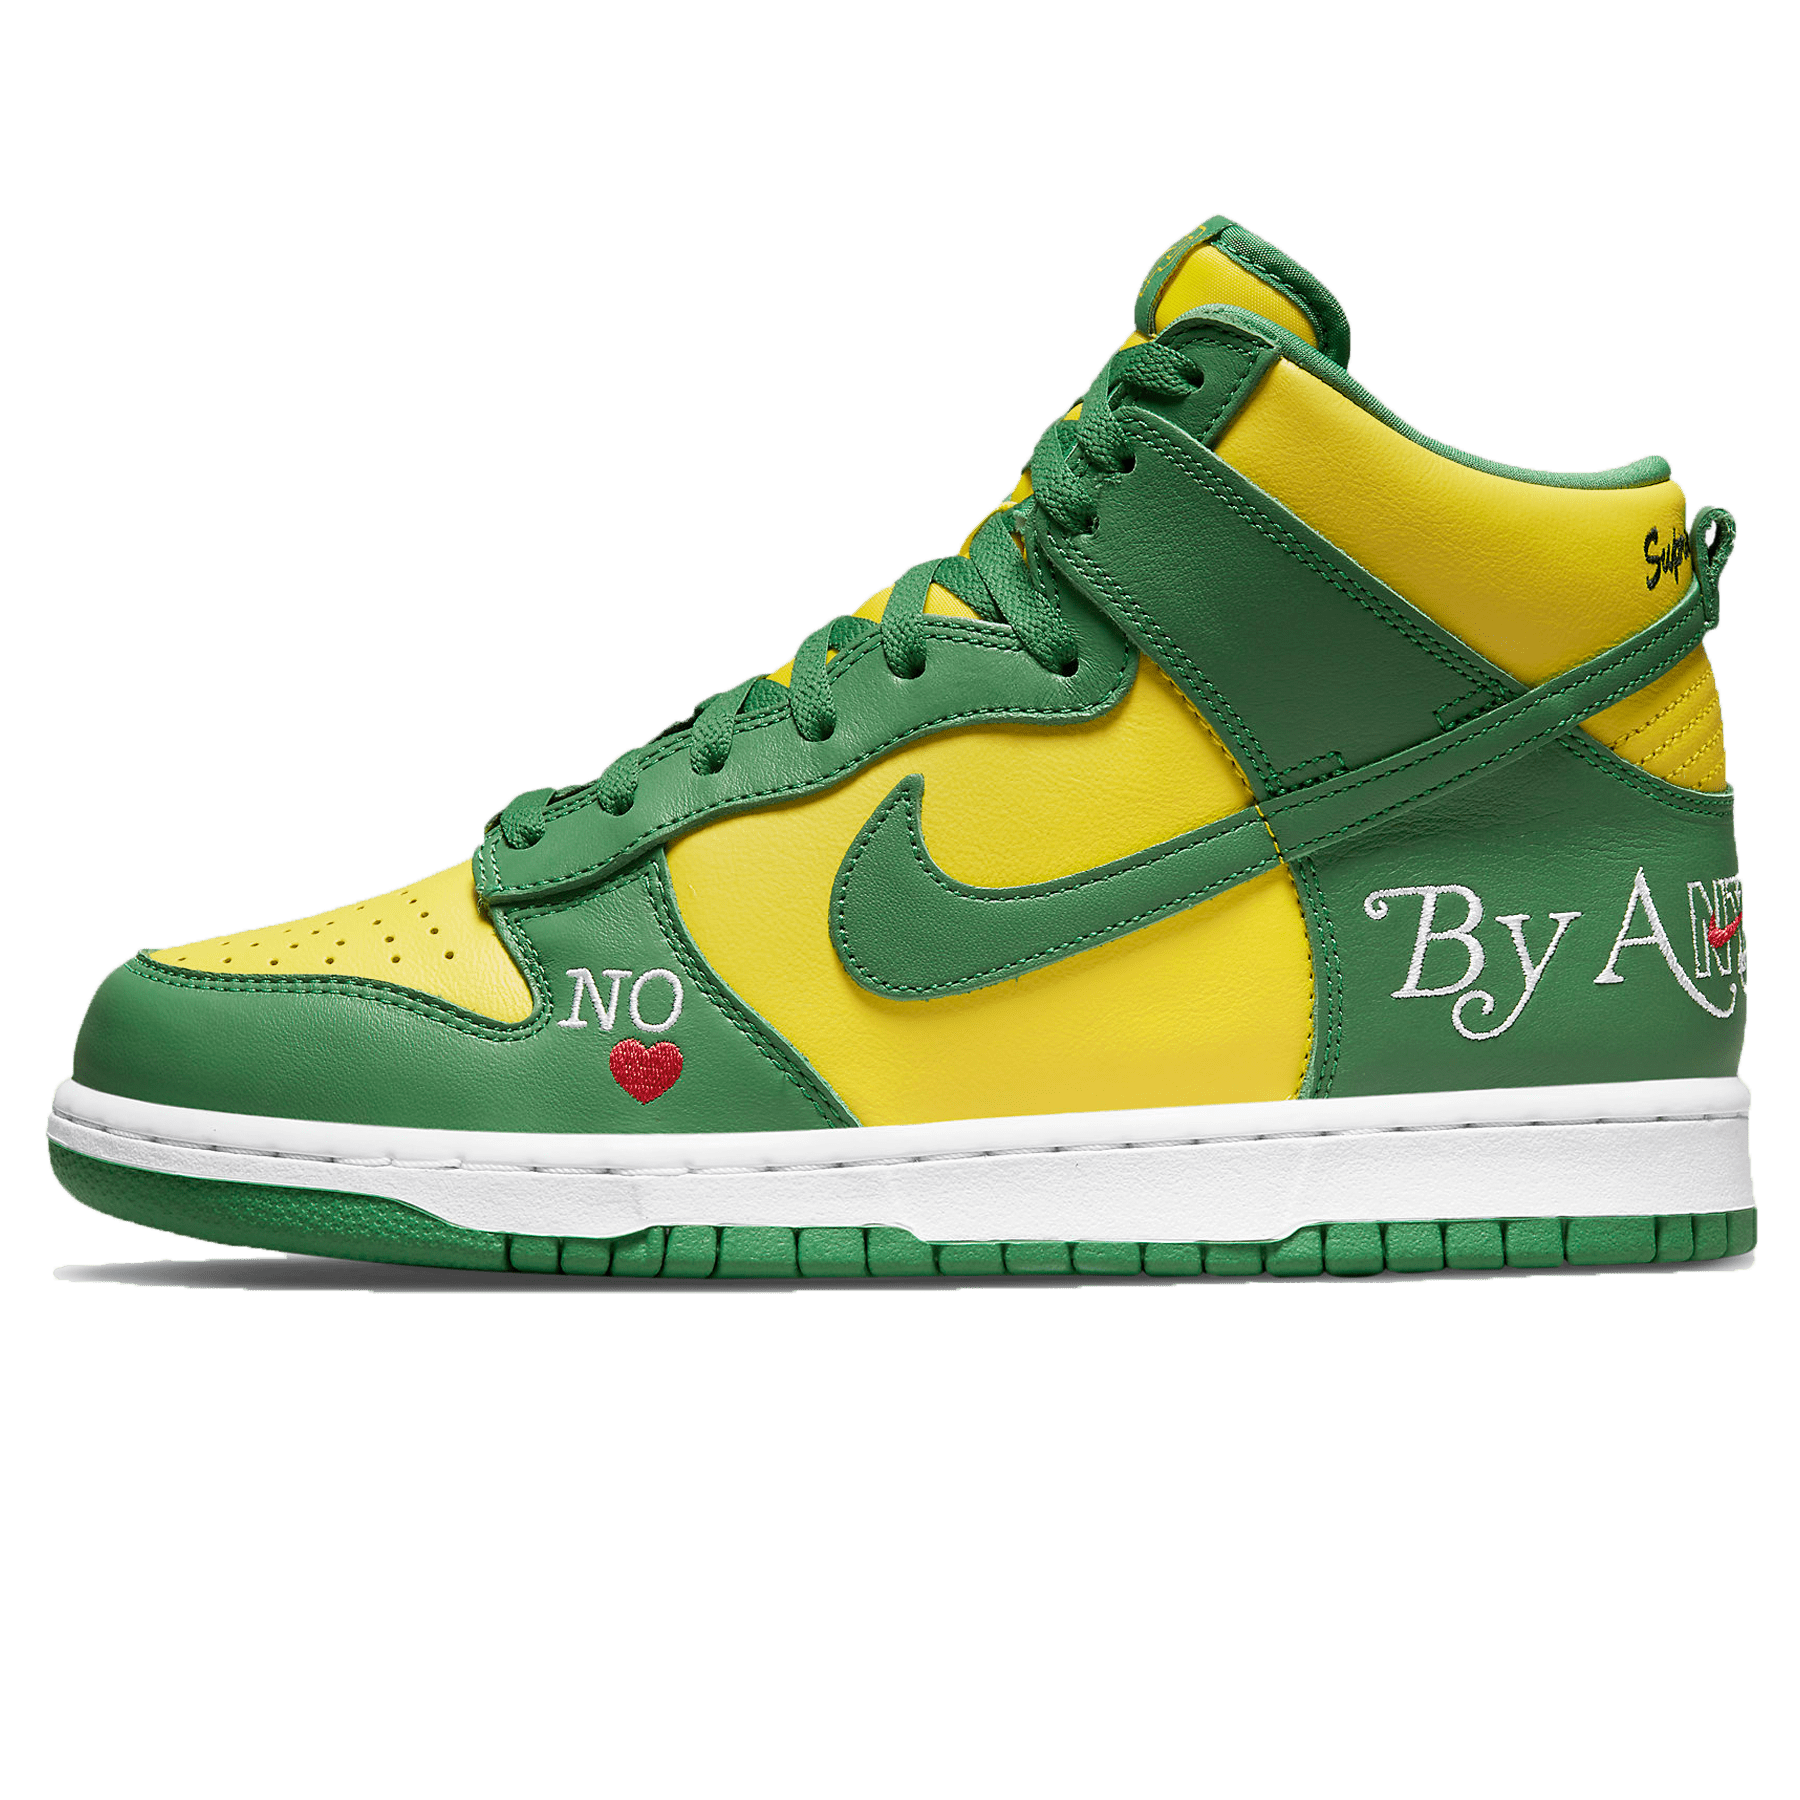 Supreme x Nike Dunk High SB By Any Means Brazil DN3741 700